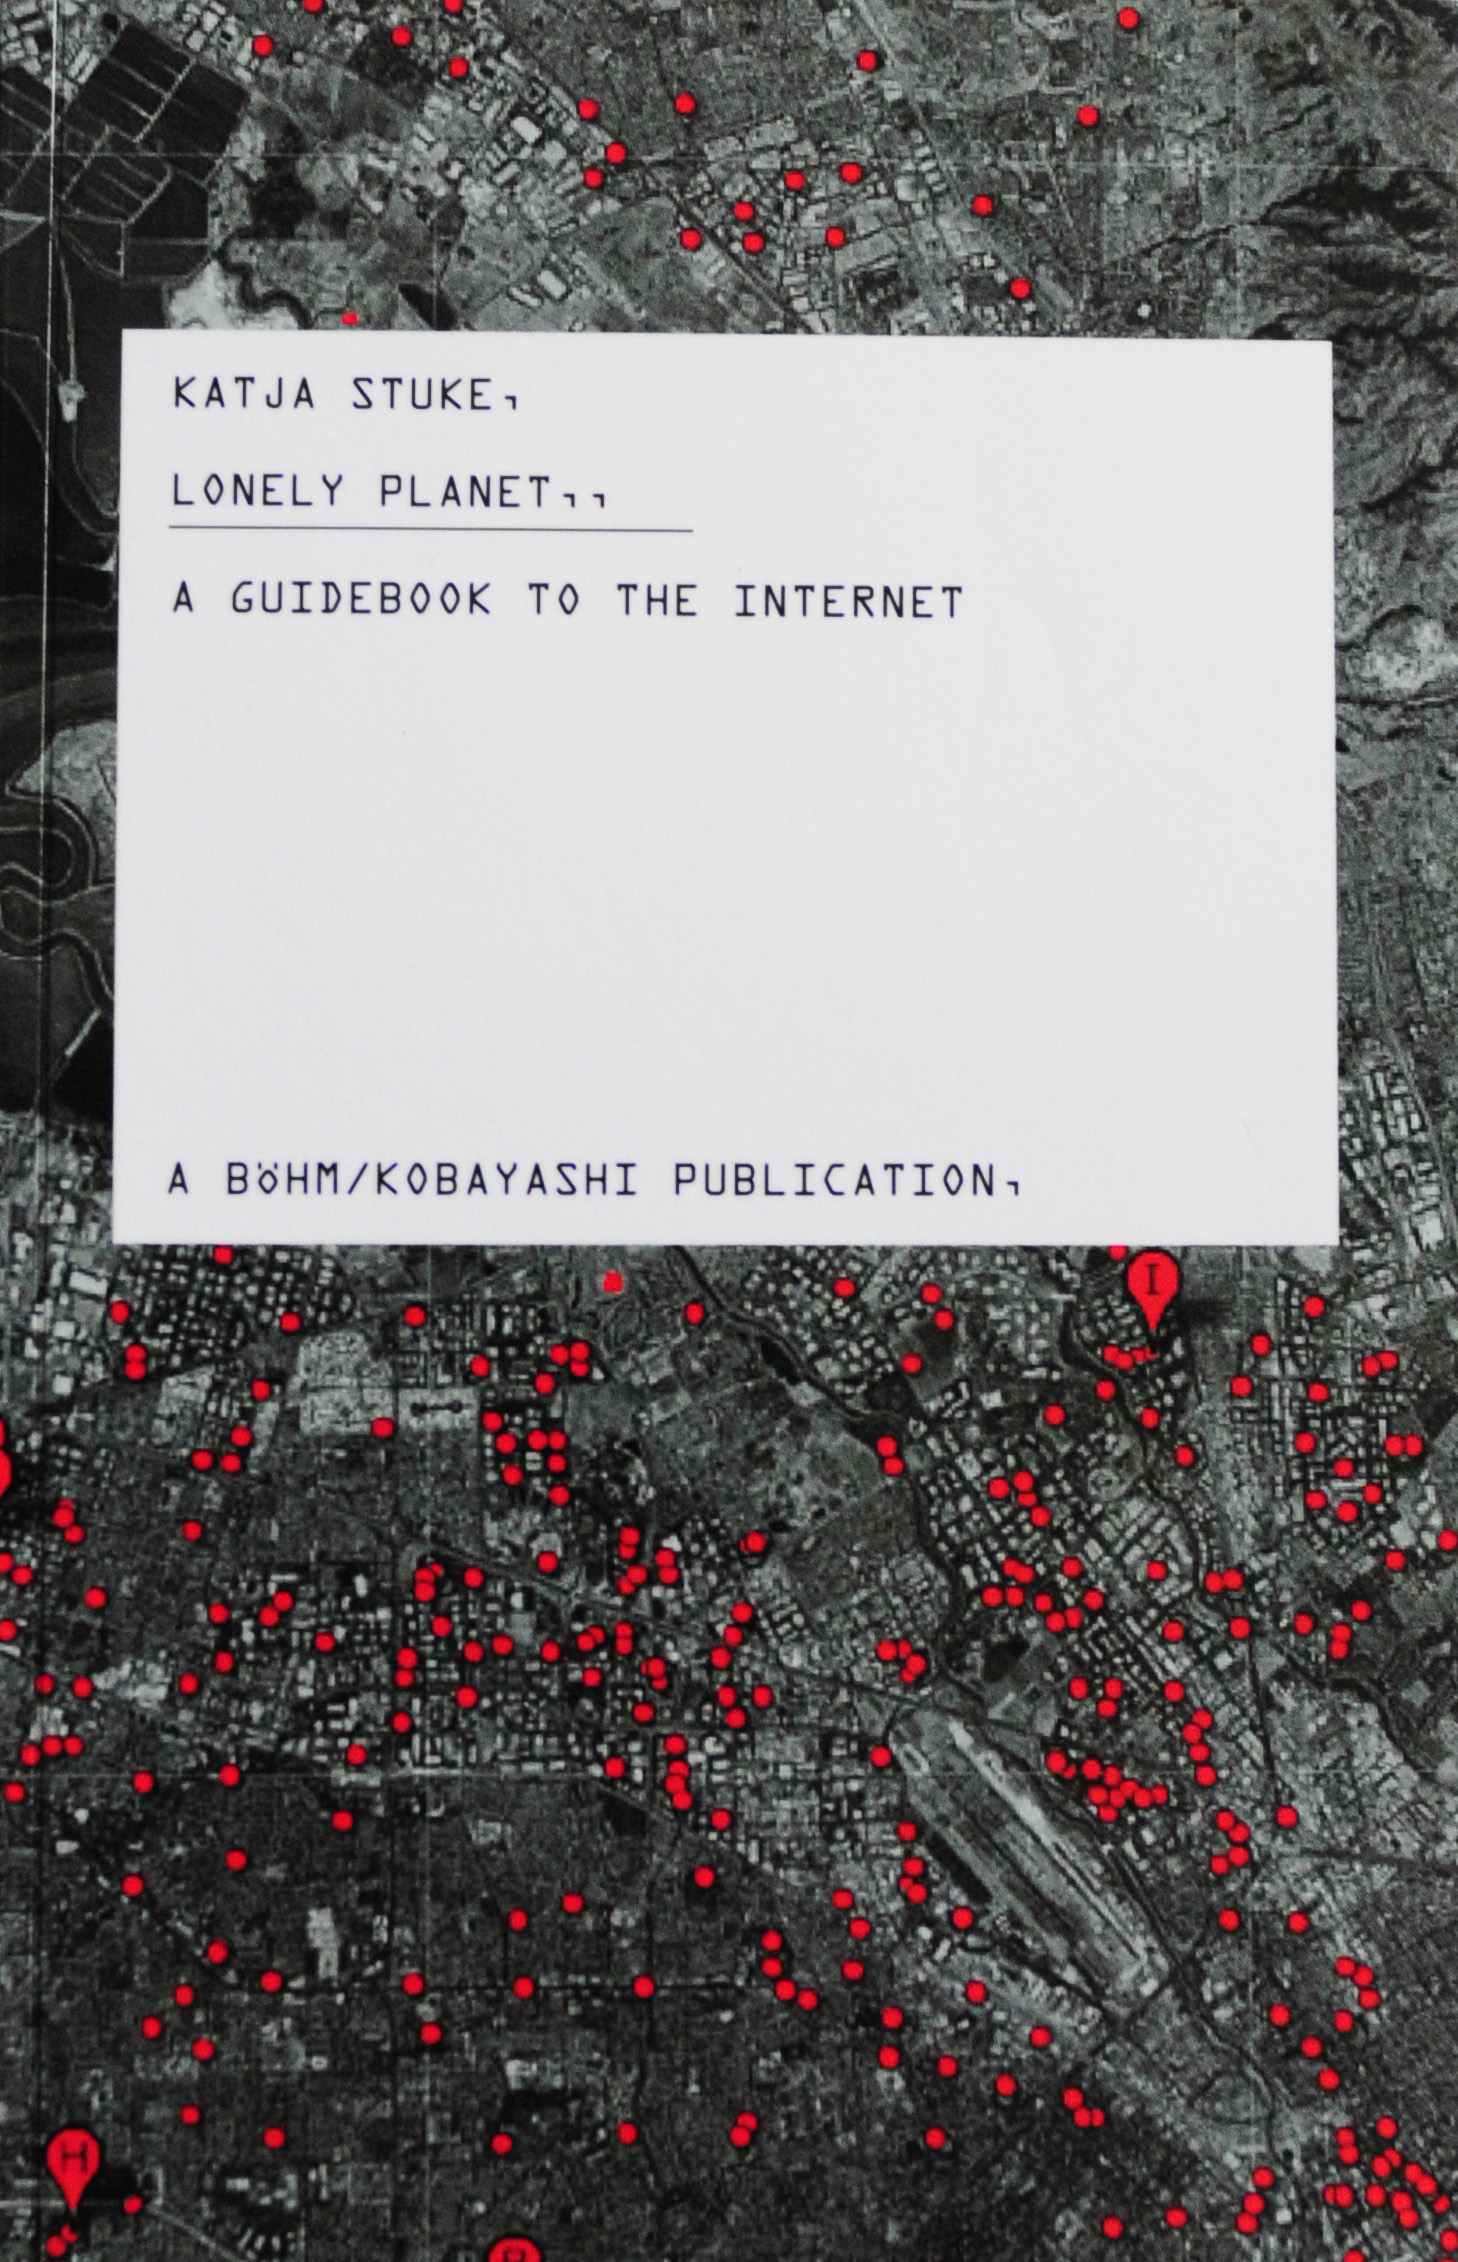 Lonely Planet: A Guidebook to the Internet Katja Stuke